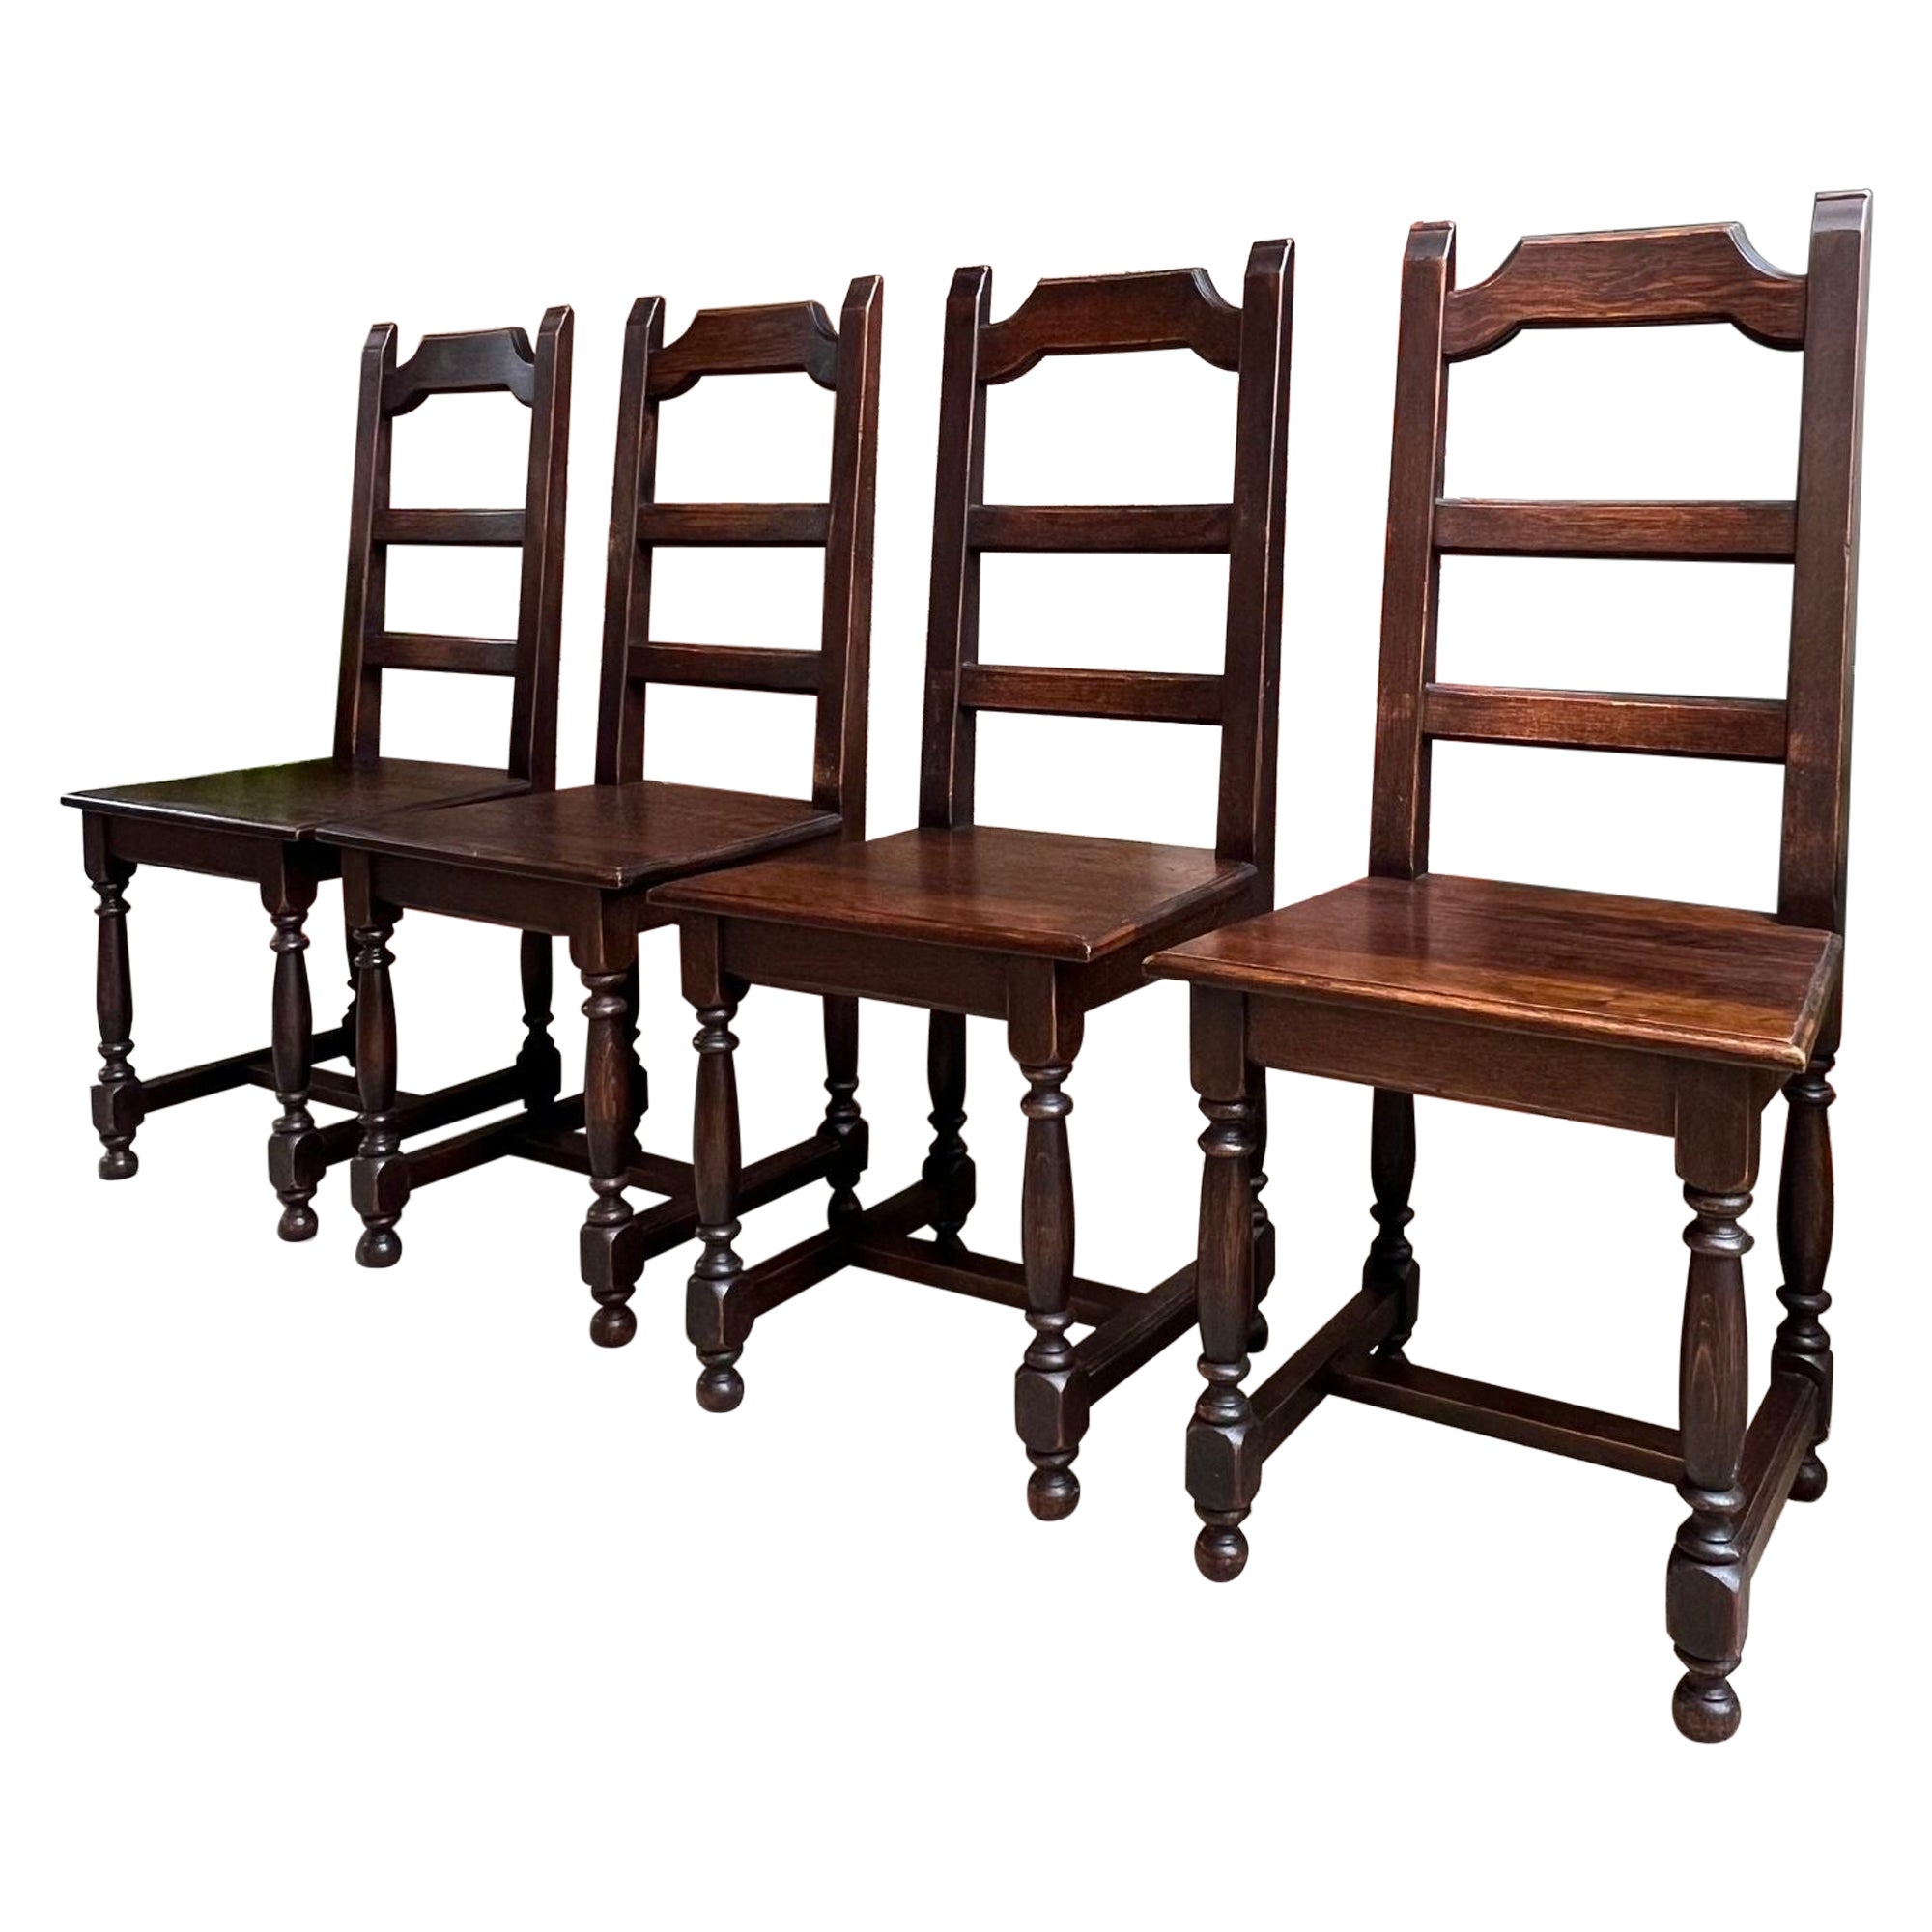 SET 4 Antique French Country Dining Chair Ladder Back Carved Dark Oak